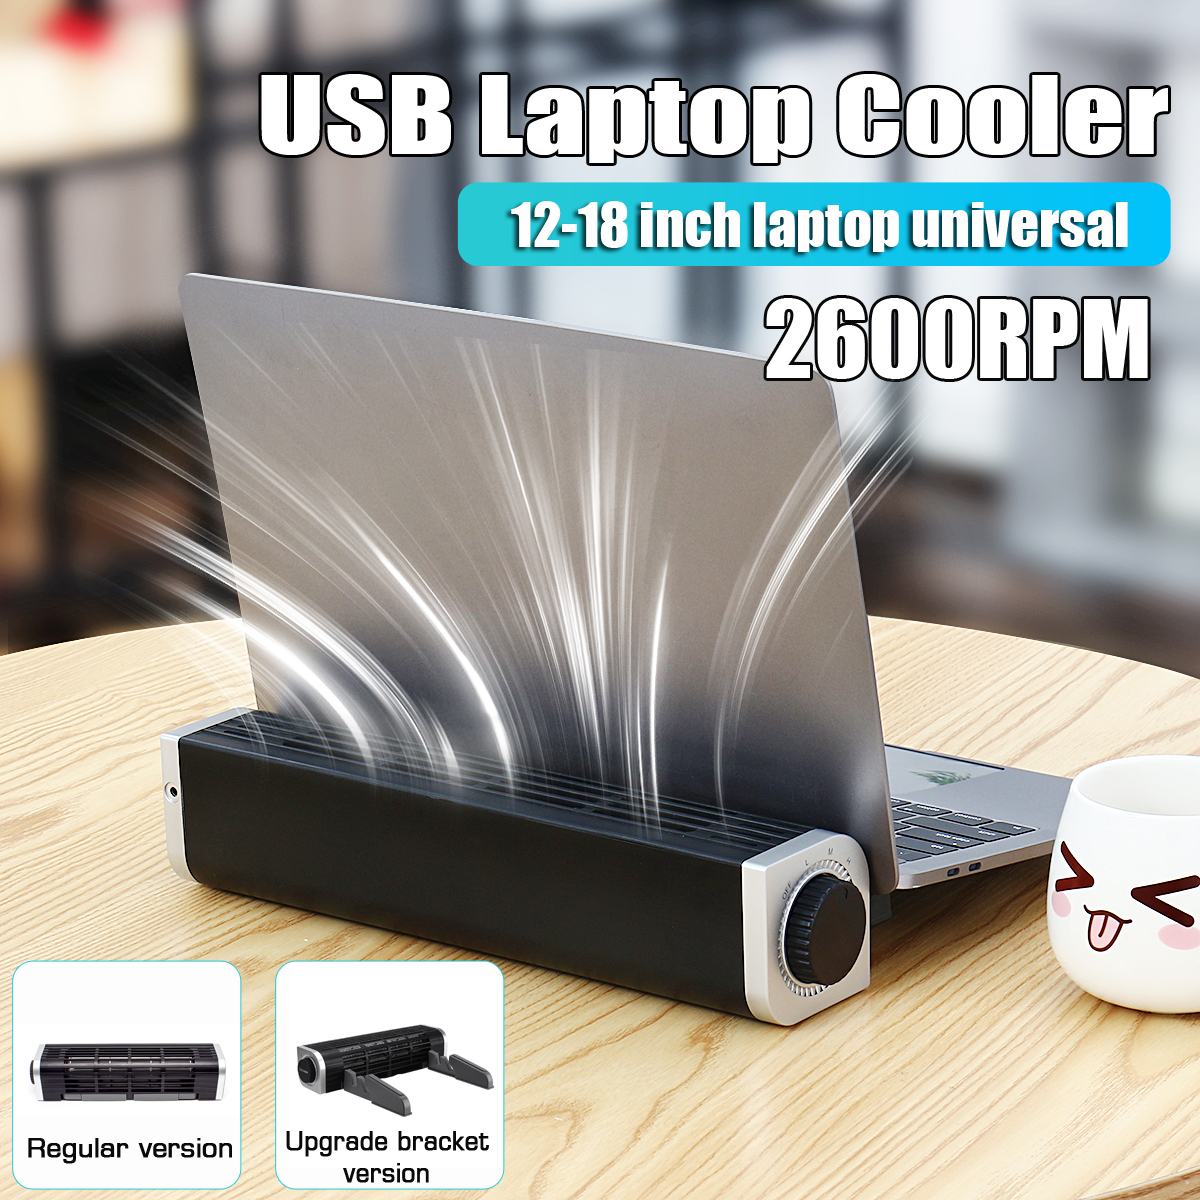 USB-Low-Noise-3-Gears-Wind-Speed-Adjustable-Macbook-Cooling-Radiator-with-Laptop-Stand-Holder-for-12-1687111-1